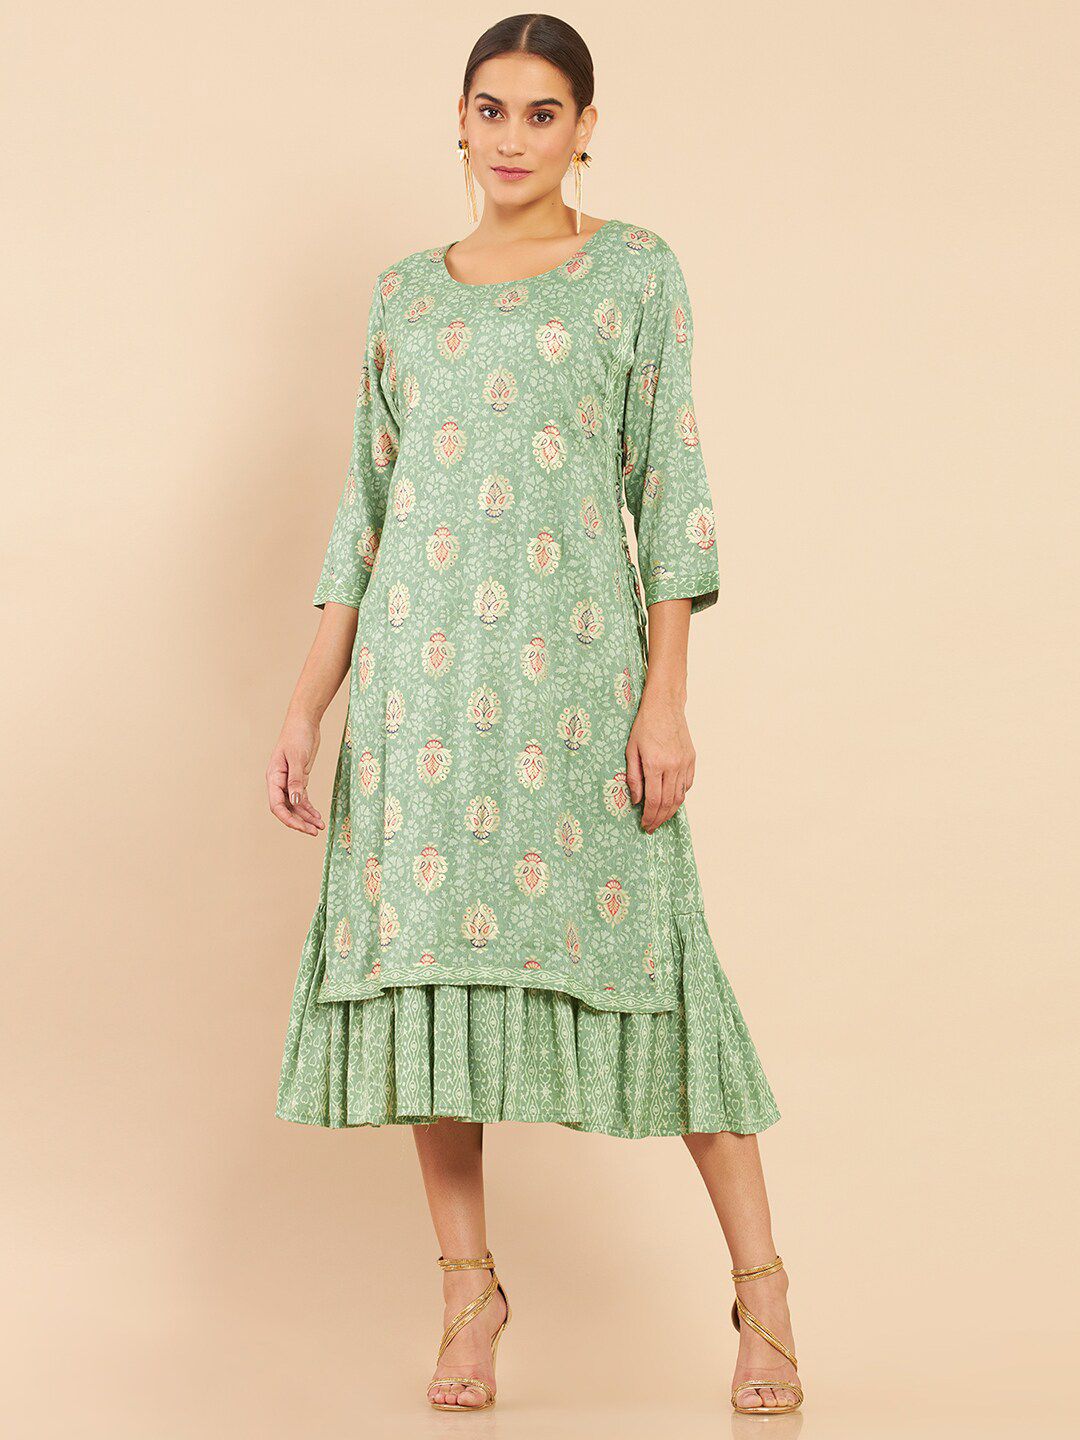 Soch Green Floral Ethnic A-Line Layered Midi Dress Price in India